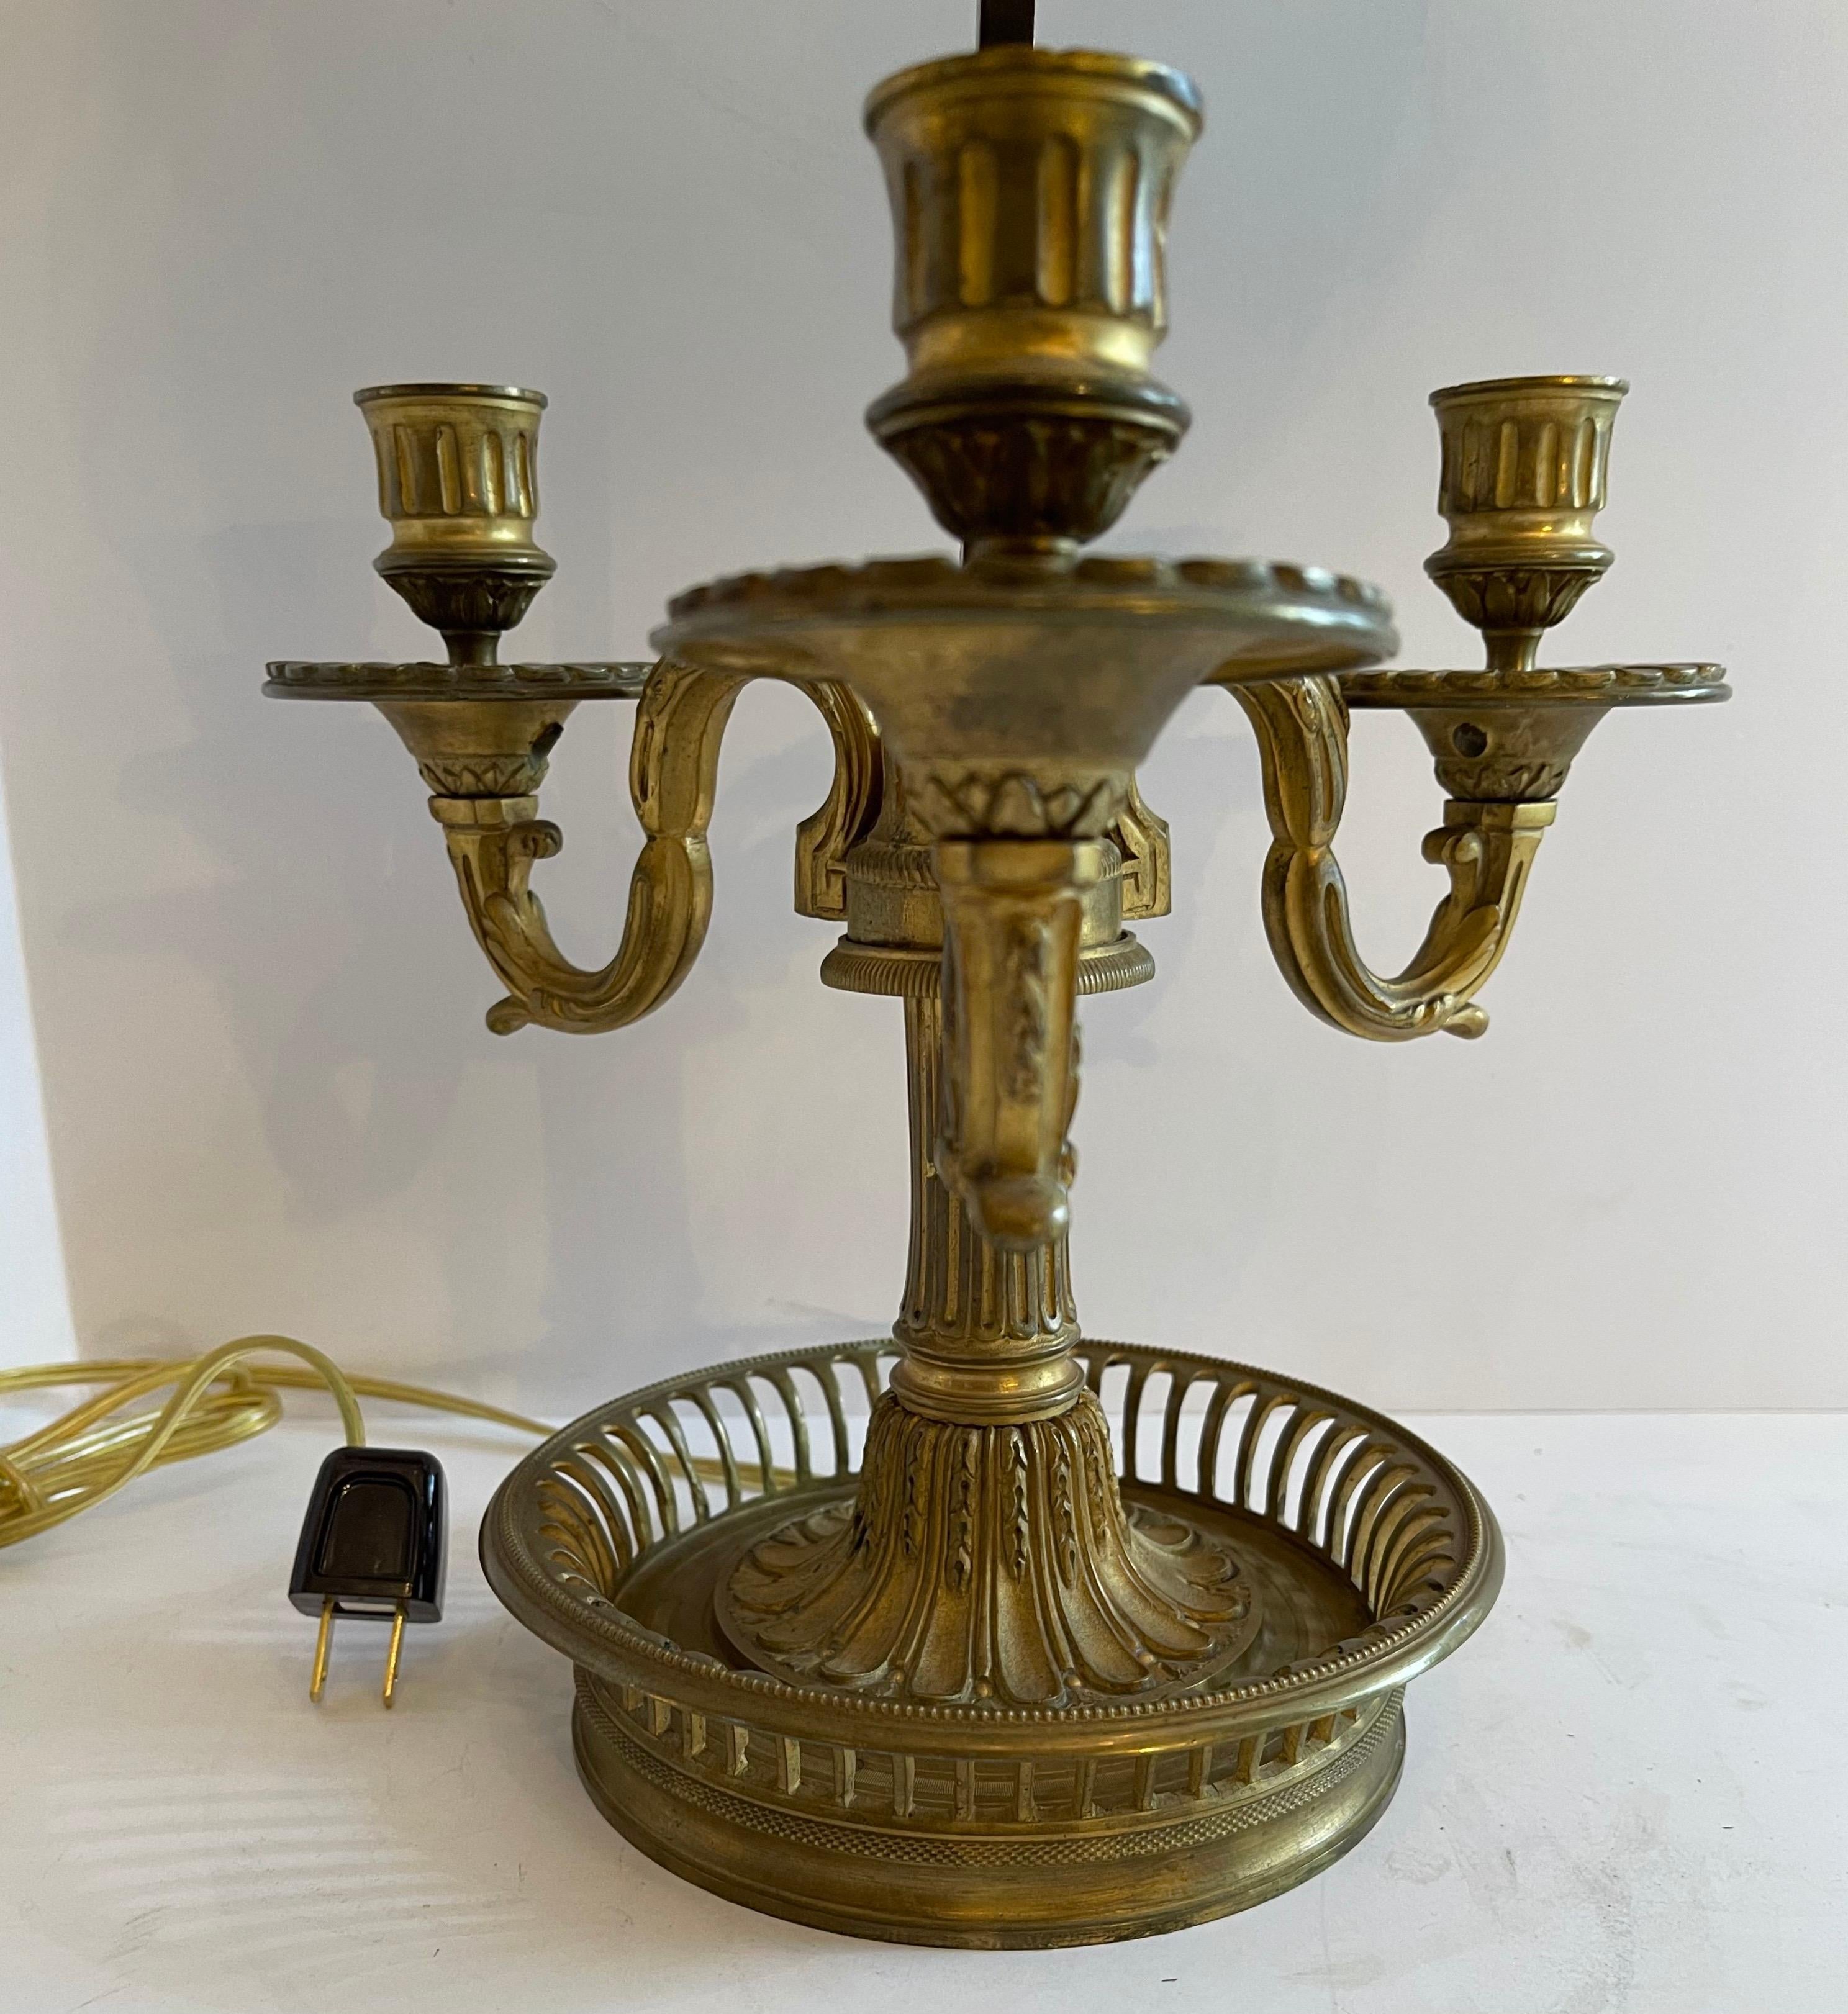 A very fine quality French neoclassical bronze three candelabra bouillotte lamp with silk shade
Interior is outfitted with two candelabra sockets, completely rewired.